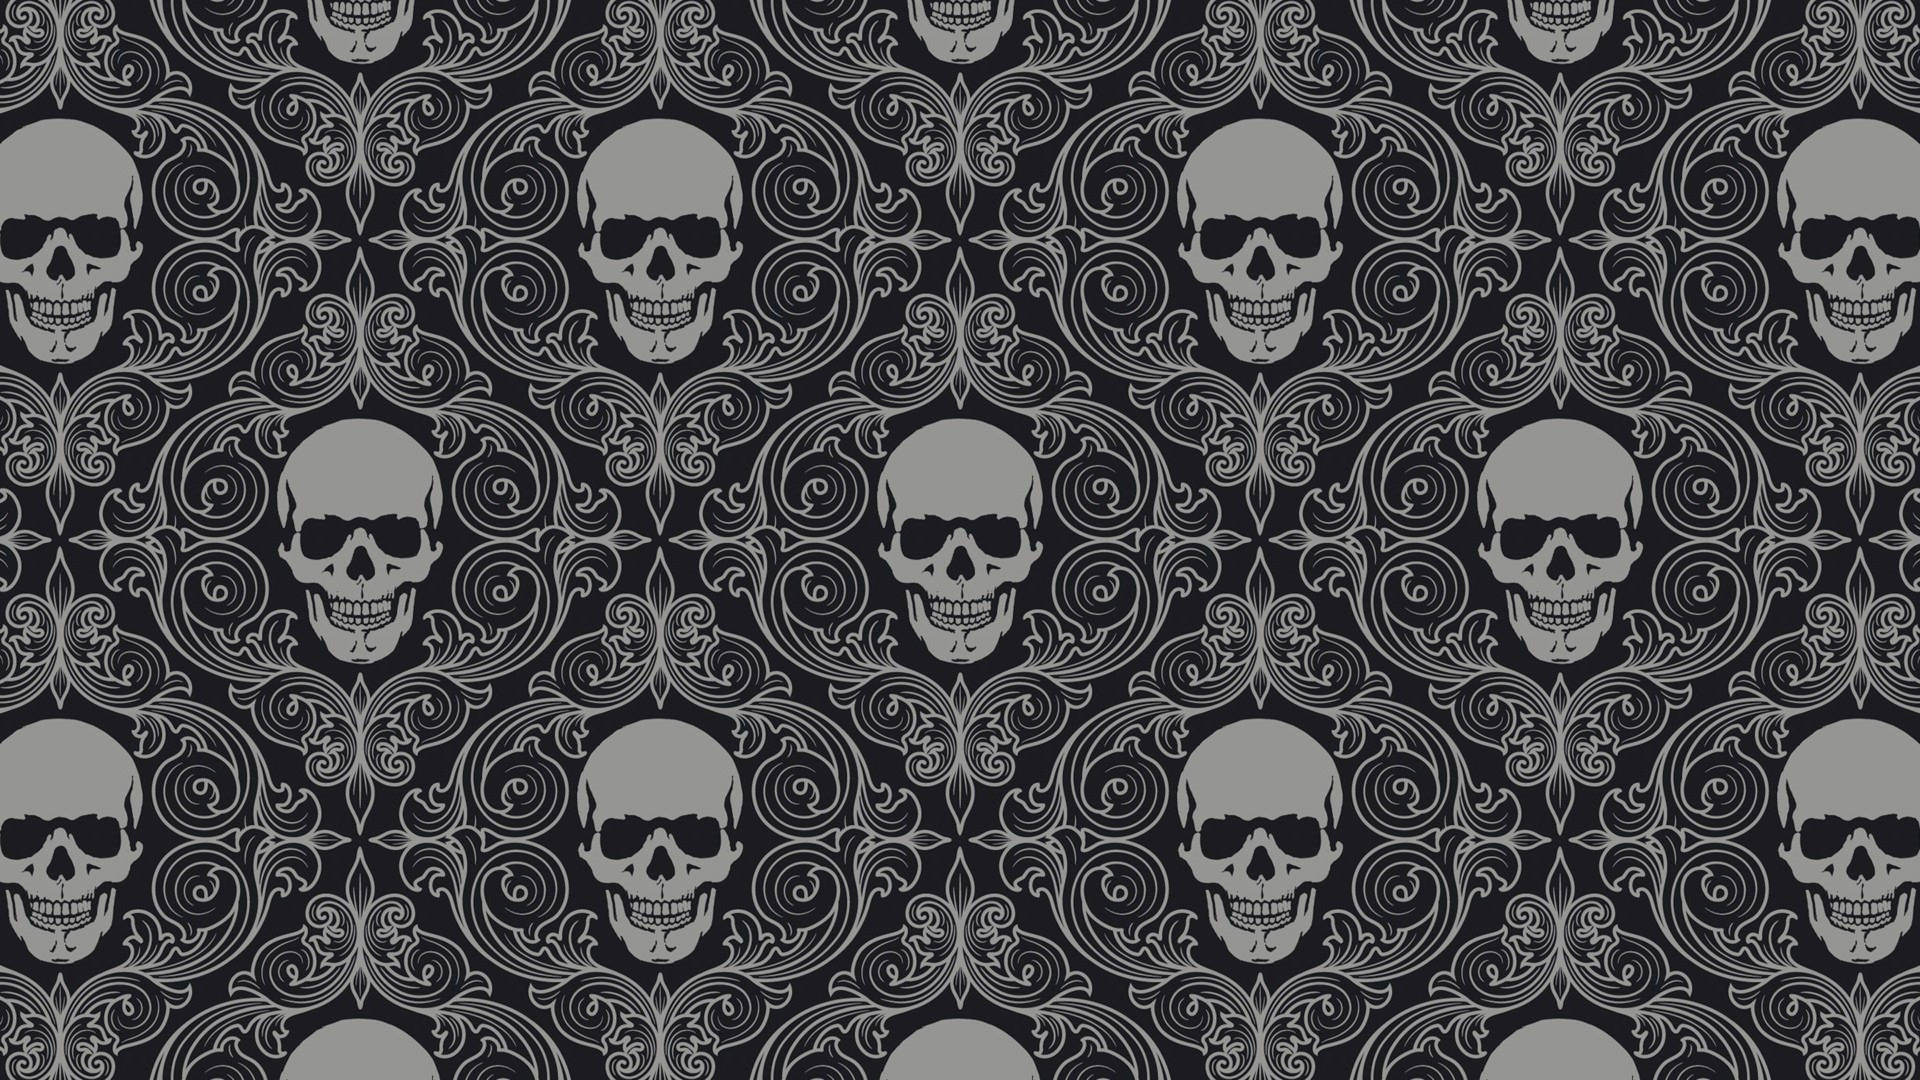 A mysterious skull pattern set against a deep blue background. Wallpaper